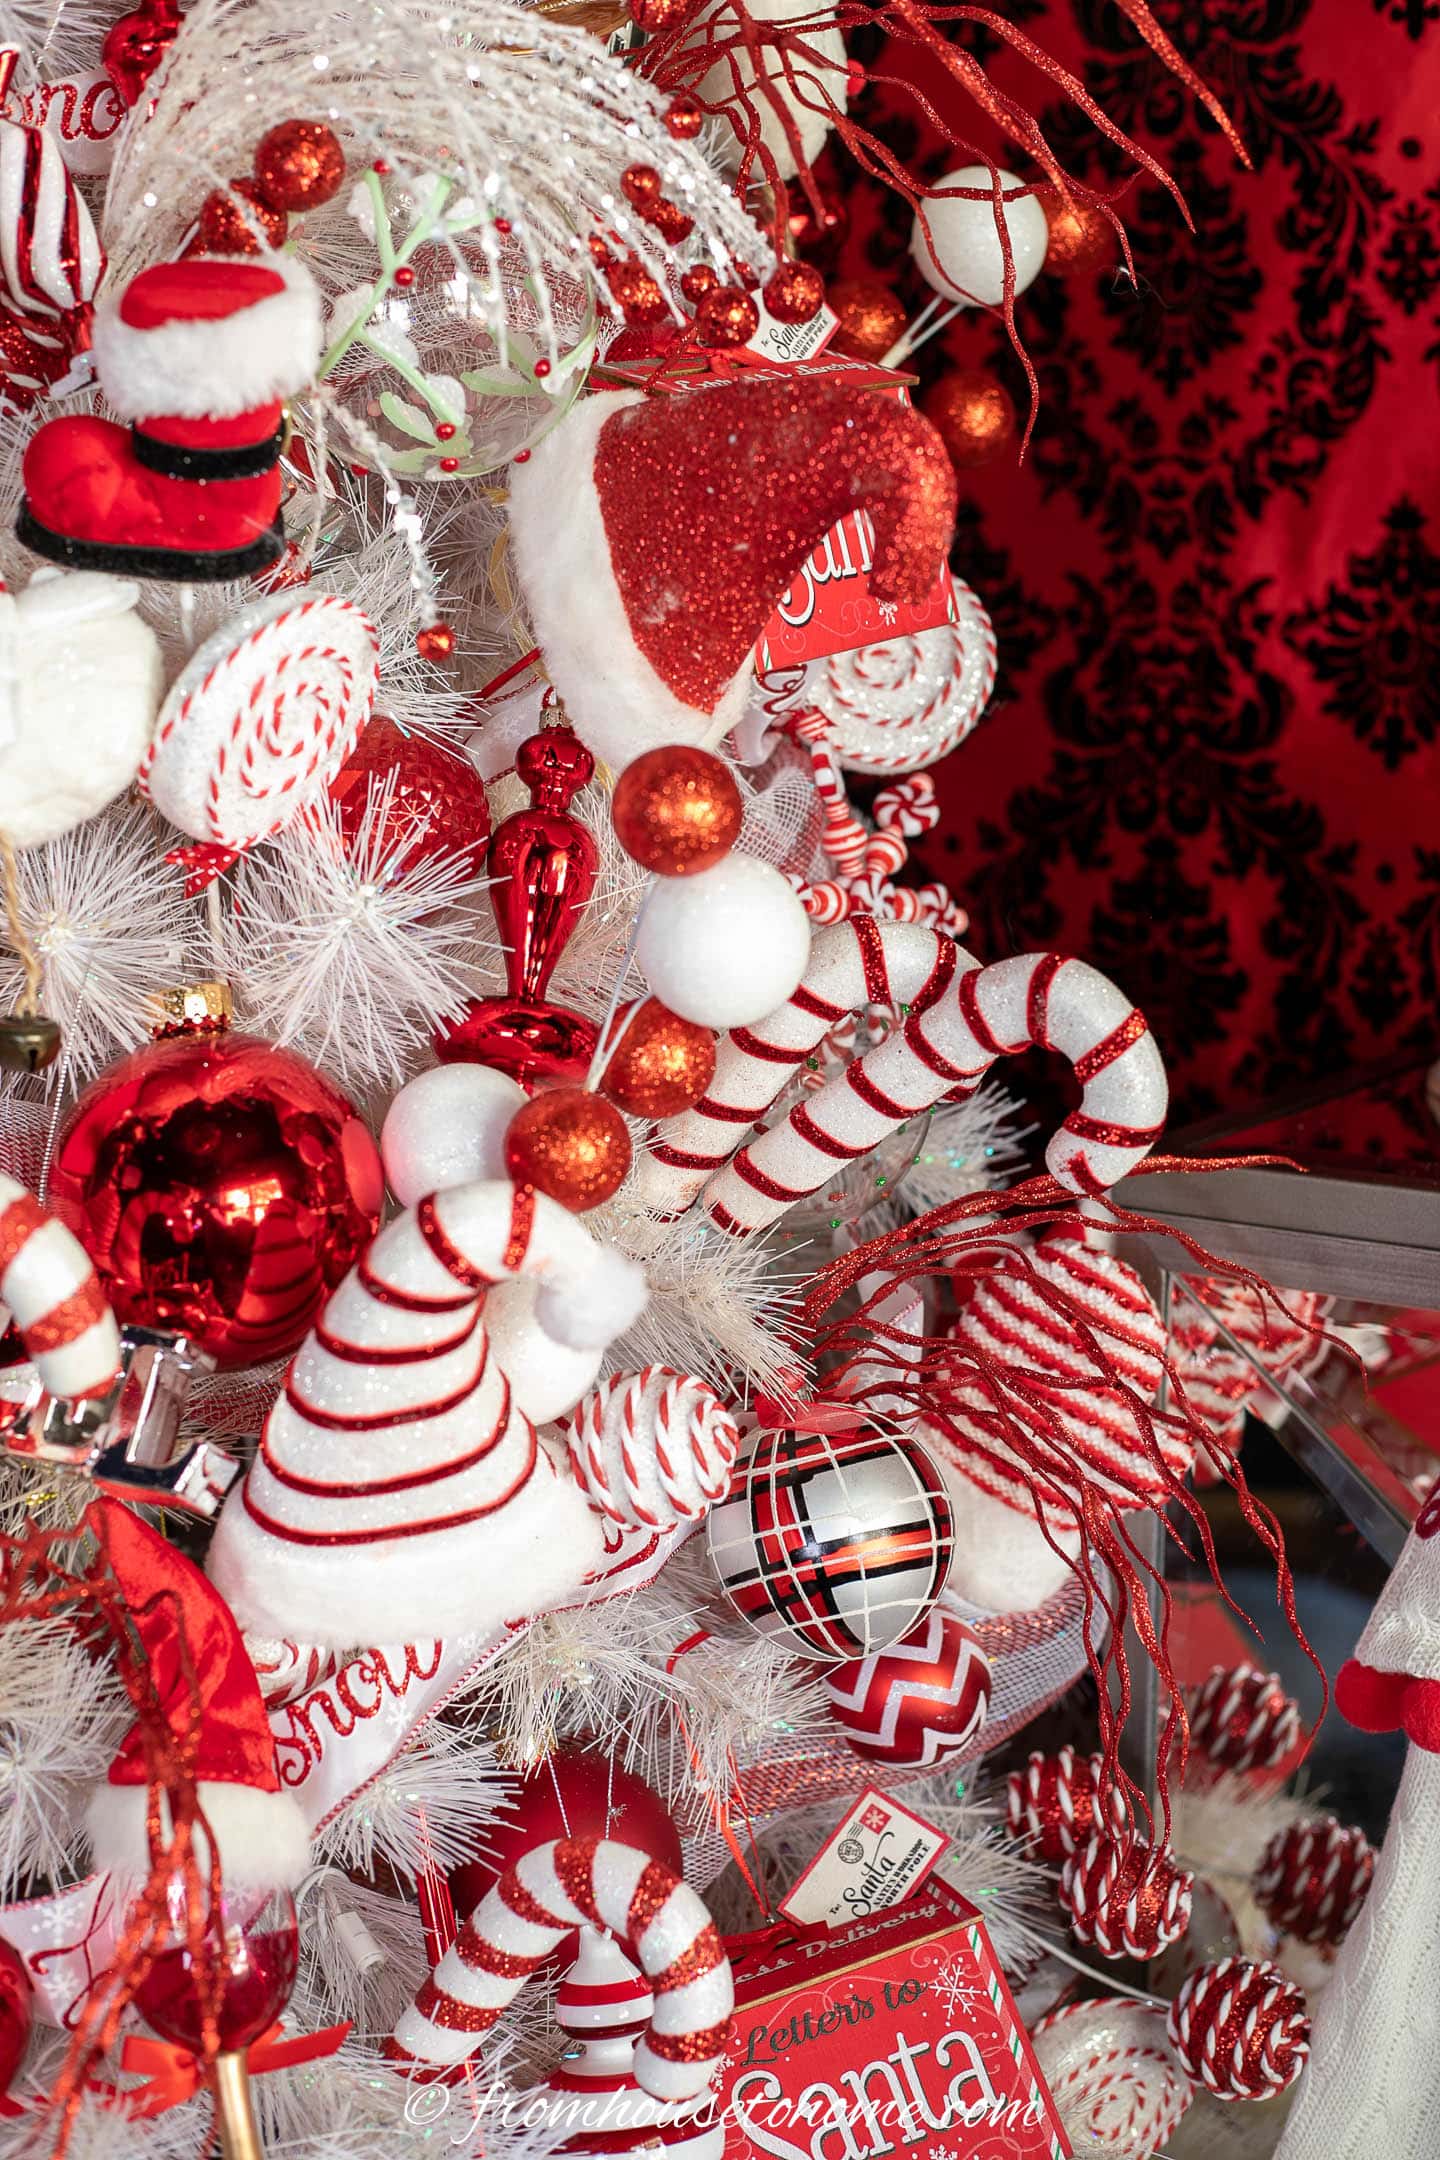 Santa hat, and candy cane picks with other red and white ornaments on a white Christmas tree